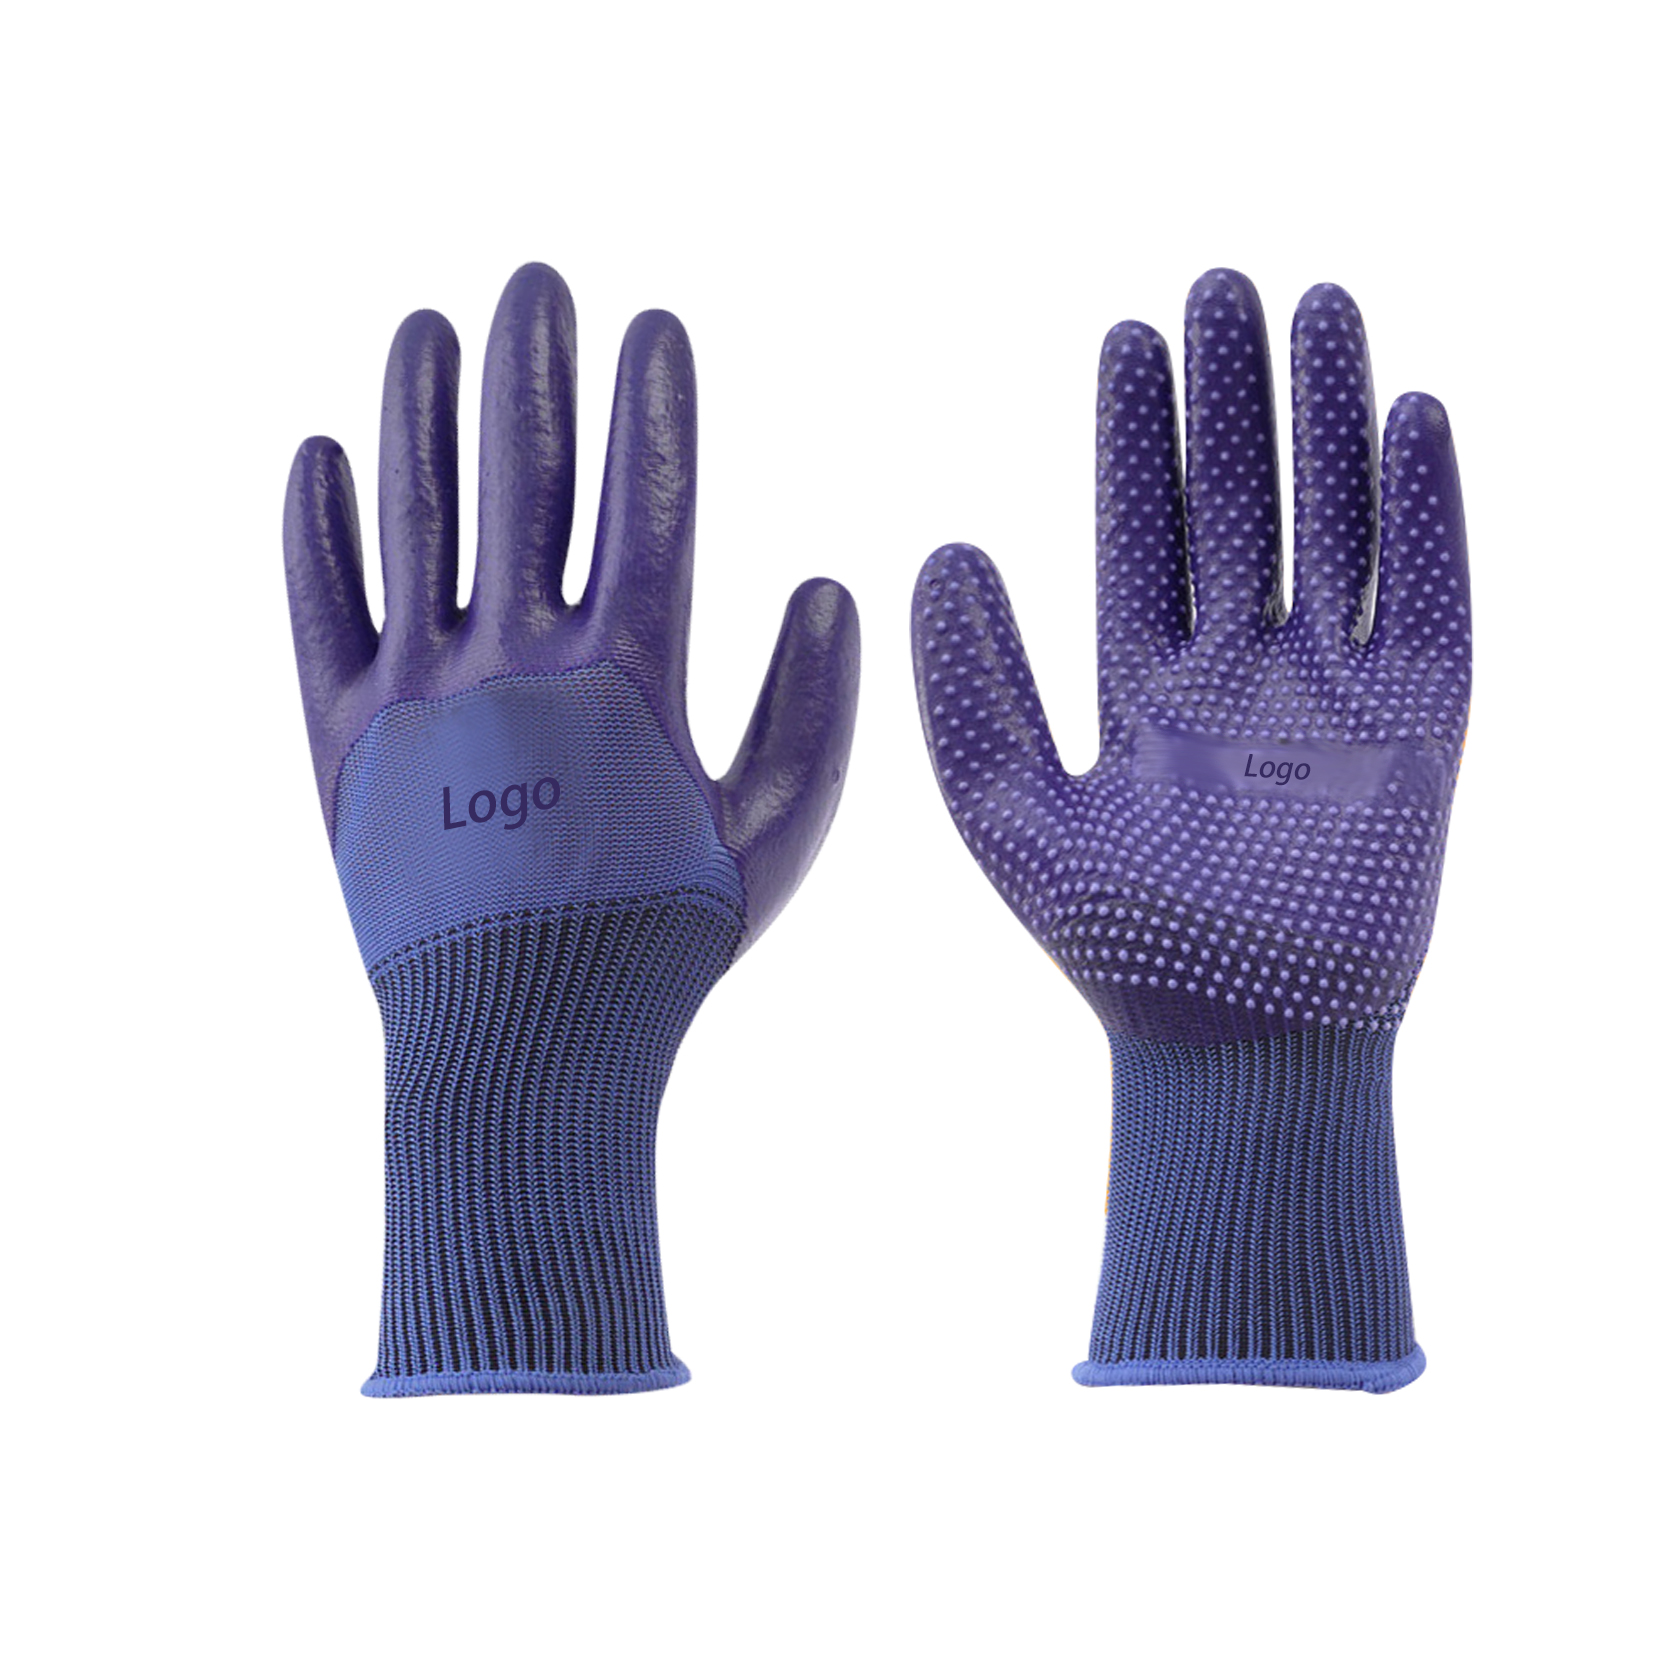 Custom Made Work Gloves General Purpose Work Safety Gloves With Pvc Dots Coated Waterproof and Oil Resistant Protective Gloves for Site Construction Auto Repair